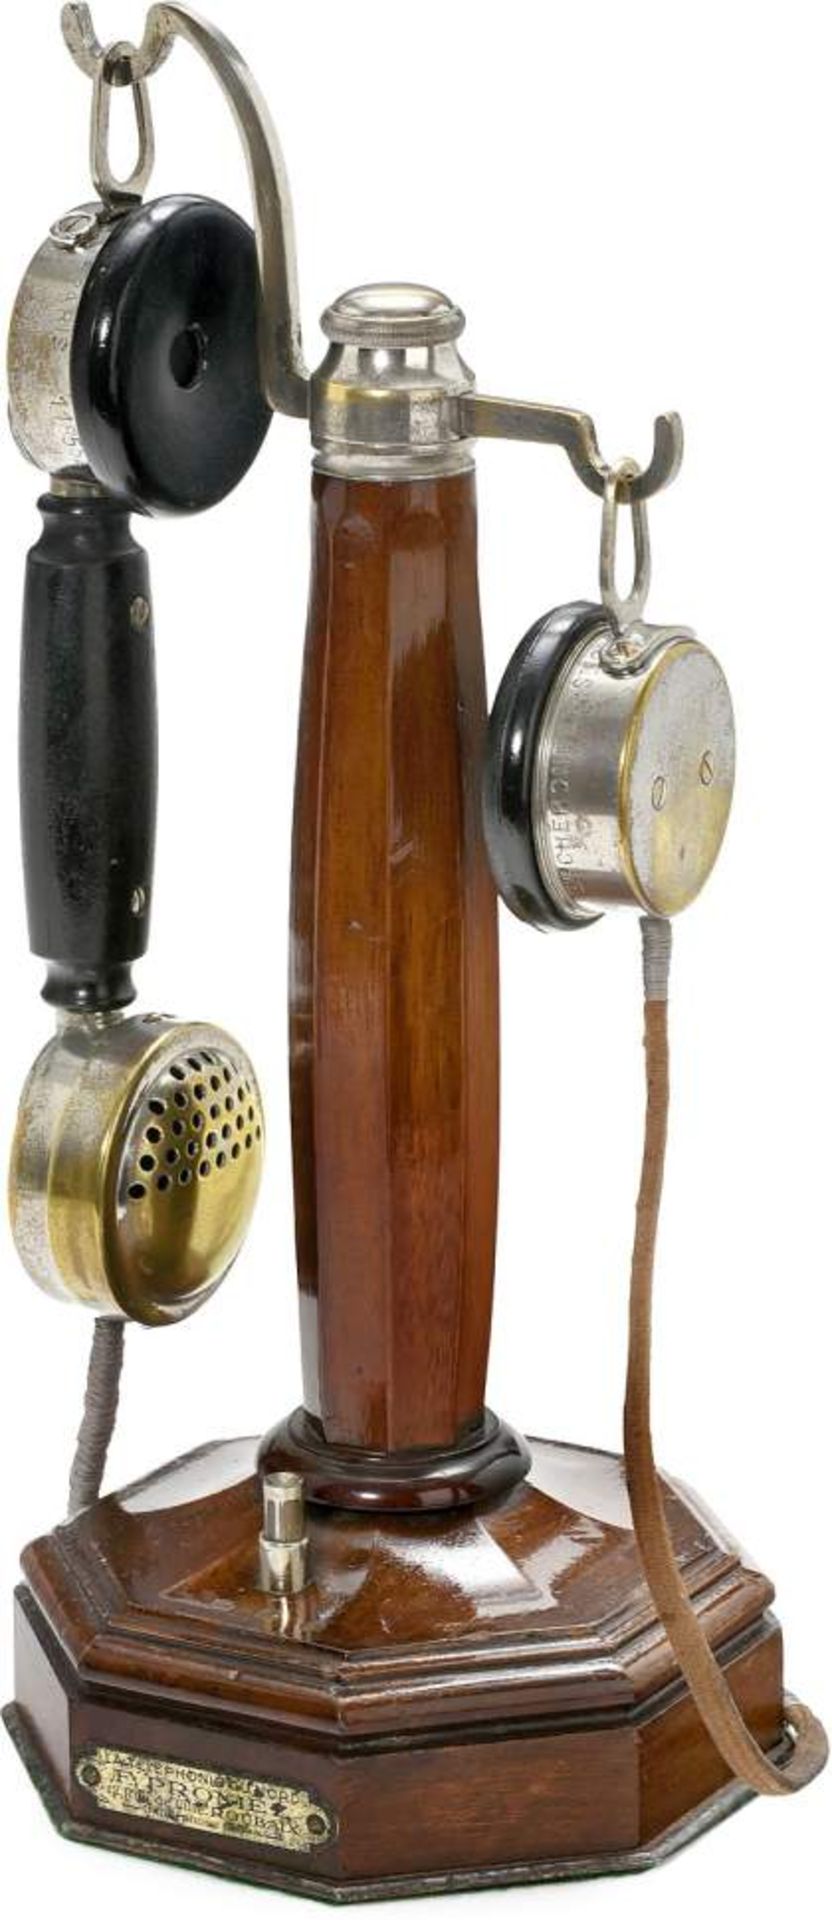 French Grammont Candlestick Telephone, c. 1918
No. 33428, signed on handset and earphone: "Steme.